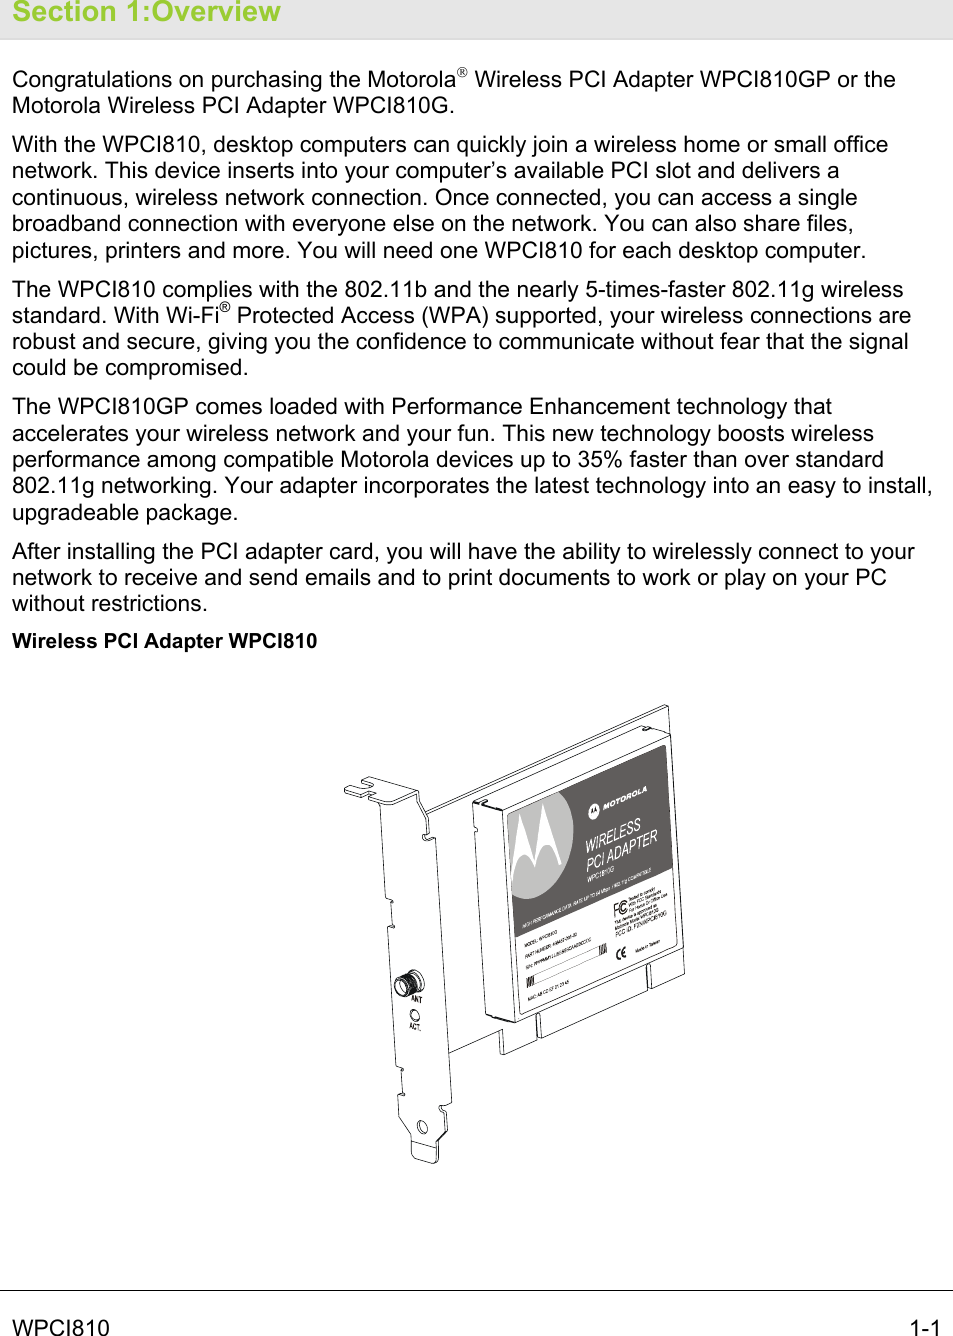   WPCI810   1-1 Section 1:Overview Congratulations on purchasing the Motorola® Wireless PCI Adapter WPCI810GP or the Motorola Wireless PCI Adapter WPCI810G. With the WPCI810, desktop computers can quickly join a wireless home or small office network. This device inserts into your computer’s available PCI slot and delivers a continuous, wireless network connection. Once connected, you can access a single broadband connection with everyone else on the network. You can also share files, pictures, printers and more. You will need one WPCI810 for each desktop computer. The WPCI810 complies with the 802.11b and the nearly 5-times-faster 802.11g wireless standard. With Wi-Fi® Protected Access (WPA) supported, your wireless connections are robust and secure, giving you the confidence to communicate without fear that the signal could be compromised. The WPCI810GP comes loaded with Performance Enhancement technology that accelerates your wireless network and your fun. This new technology boosts wireless performance among compatible Motorola devices up to 35% faster than over standard 802.11g networking. Your adapter incorporates the latest technology into an easy to install, upgradeable package.  After installing the PCI adapter card, you will have the ability to wirelessly connect to your network to receive and send emails and to print documents to work or play on your PC without restrictions. Wireless PCI Adapter WPCI810  